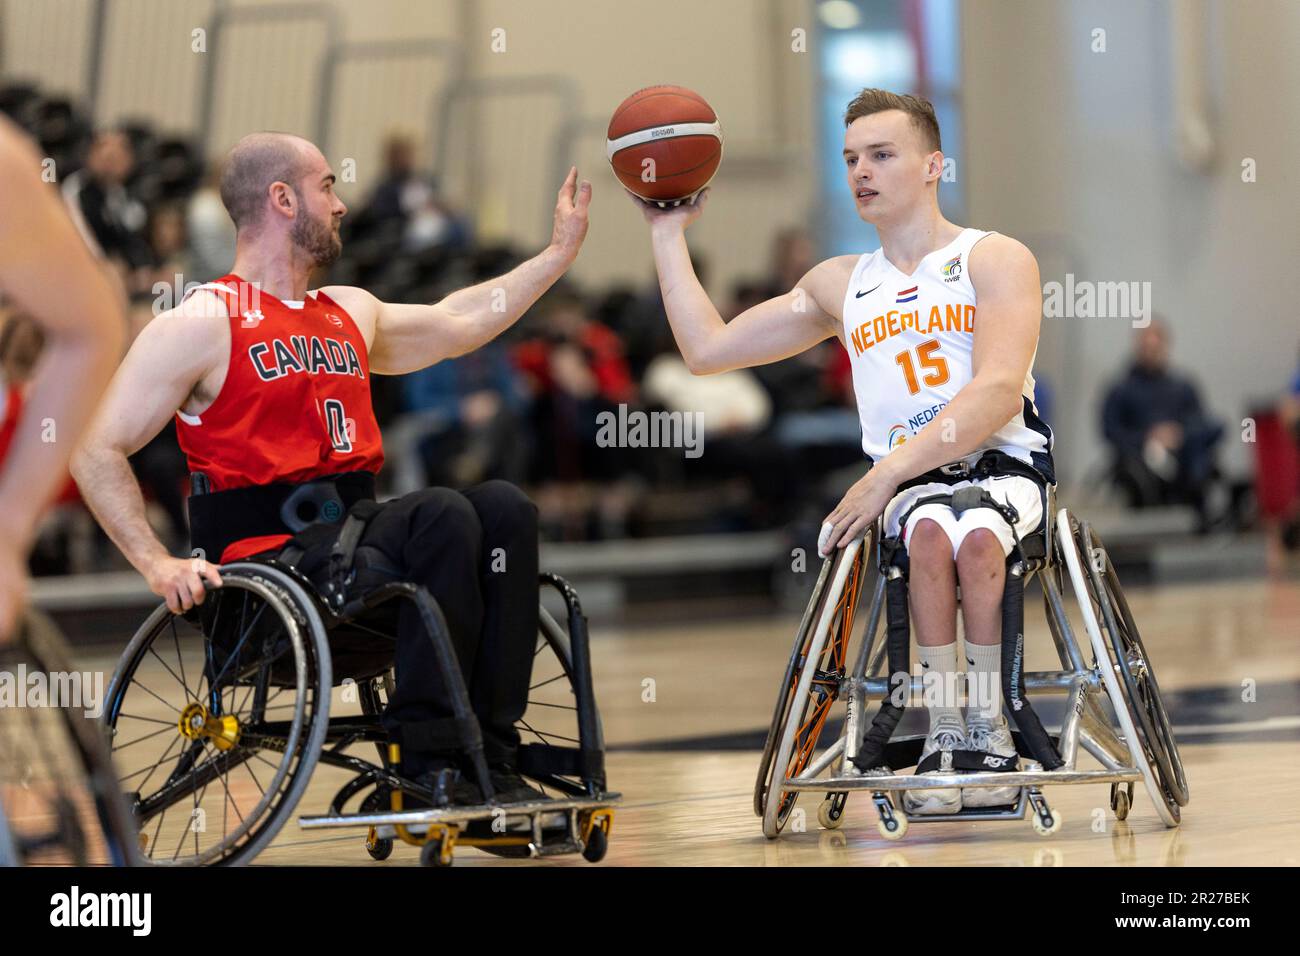 Ottawa, Canada. 17 May 2023. Lee Melymick (10) of the Canada Men's wheelchair basketball team and Quinetn Zantinge (15) of the Netherlands Men's wheelchair basketball team in men’s wheelchair basketball action in the Canada development squad versus the Netherlands national team in the Ottawa Invitational Tournament at Carleton University. Copyright 2023 Sean Burges / Mundo Sport Images / Alamo Live News. Stock Photo